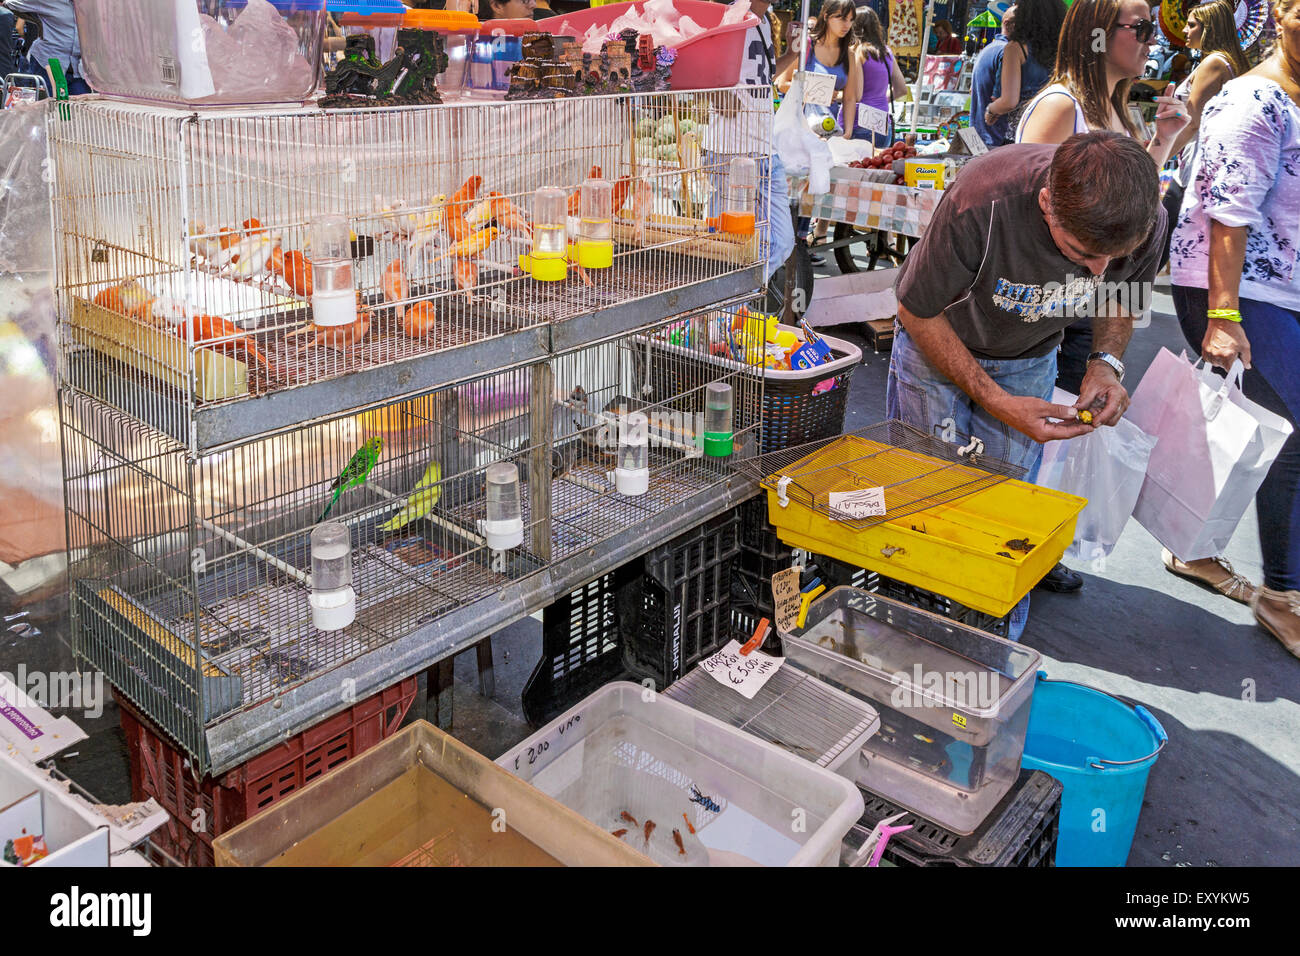 Market trader at the Open street market, catania, Sicily, Italy selling birds, tropical fish and terrapins, Stock Photo